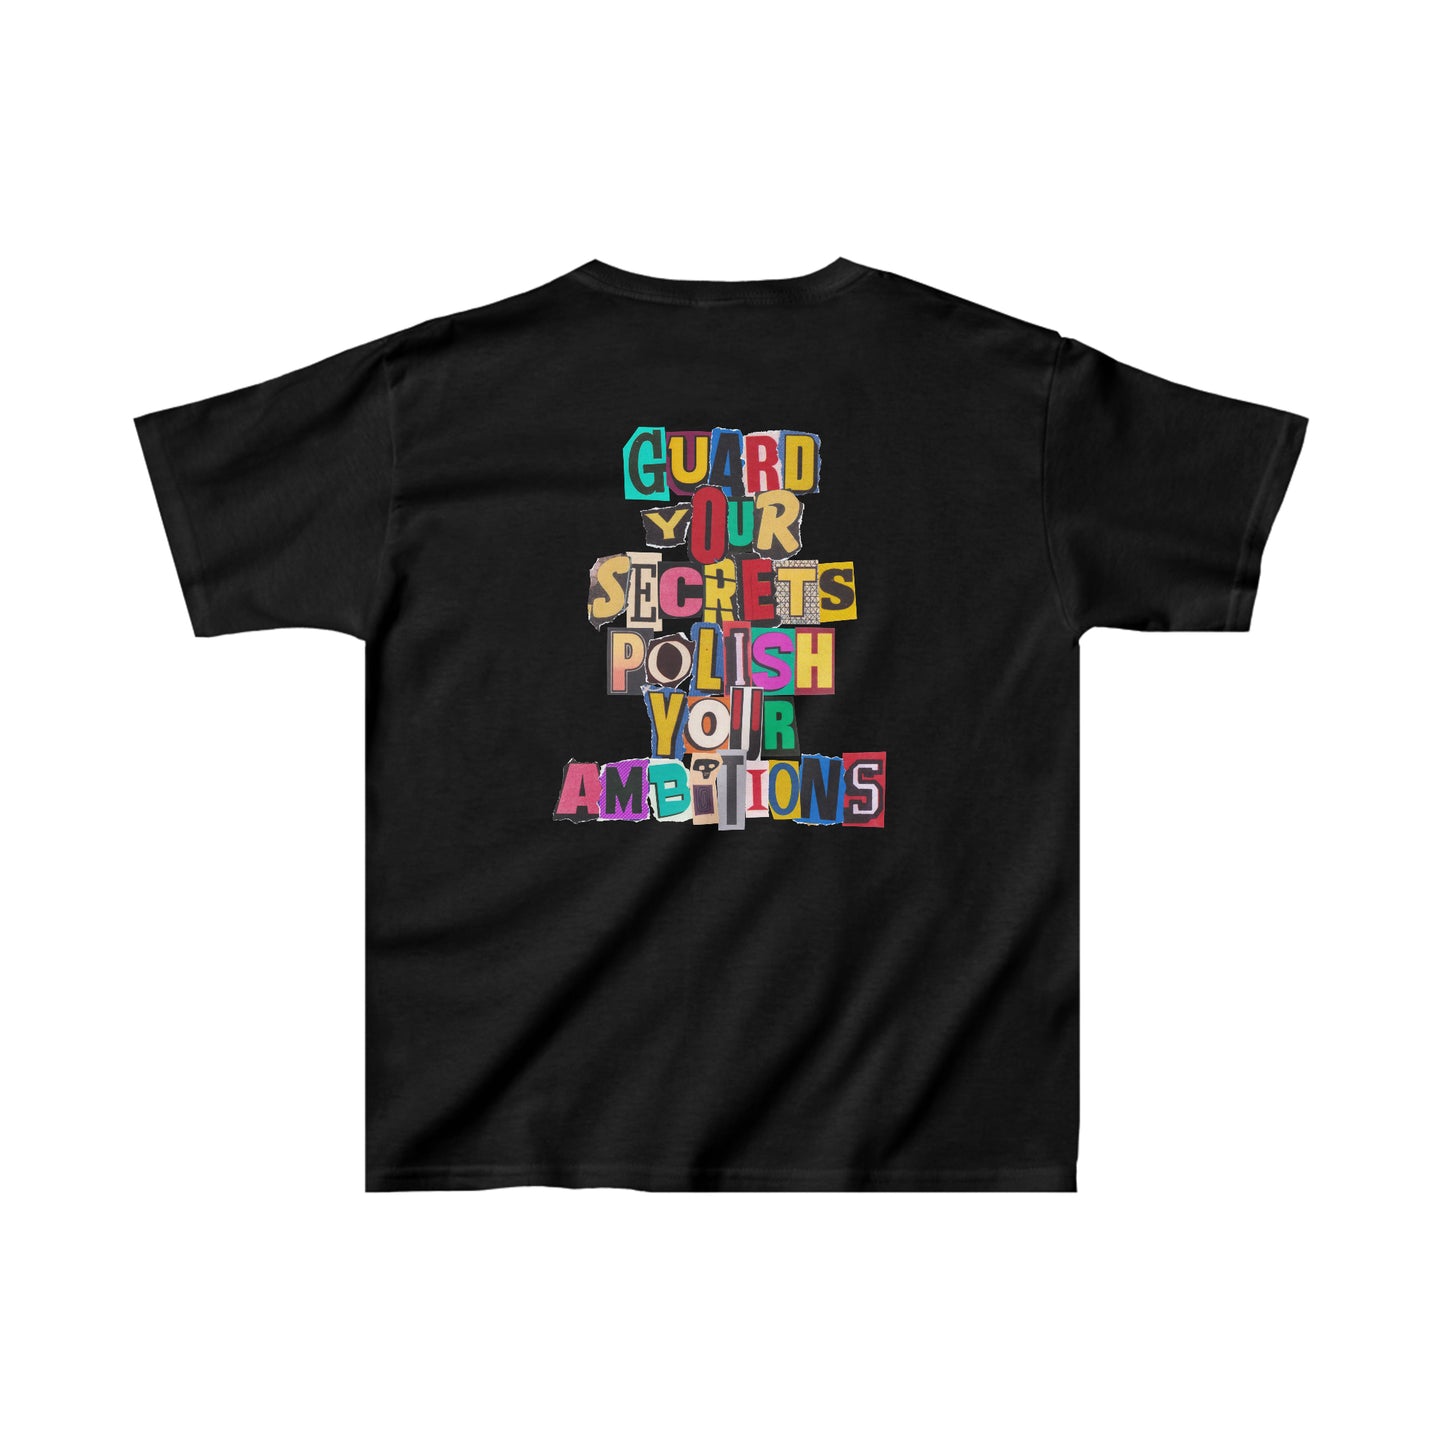 Youth WIY x St. Brown Vintage T-Shirt